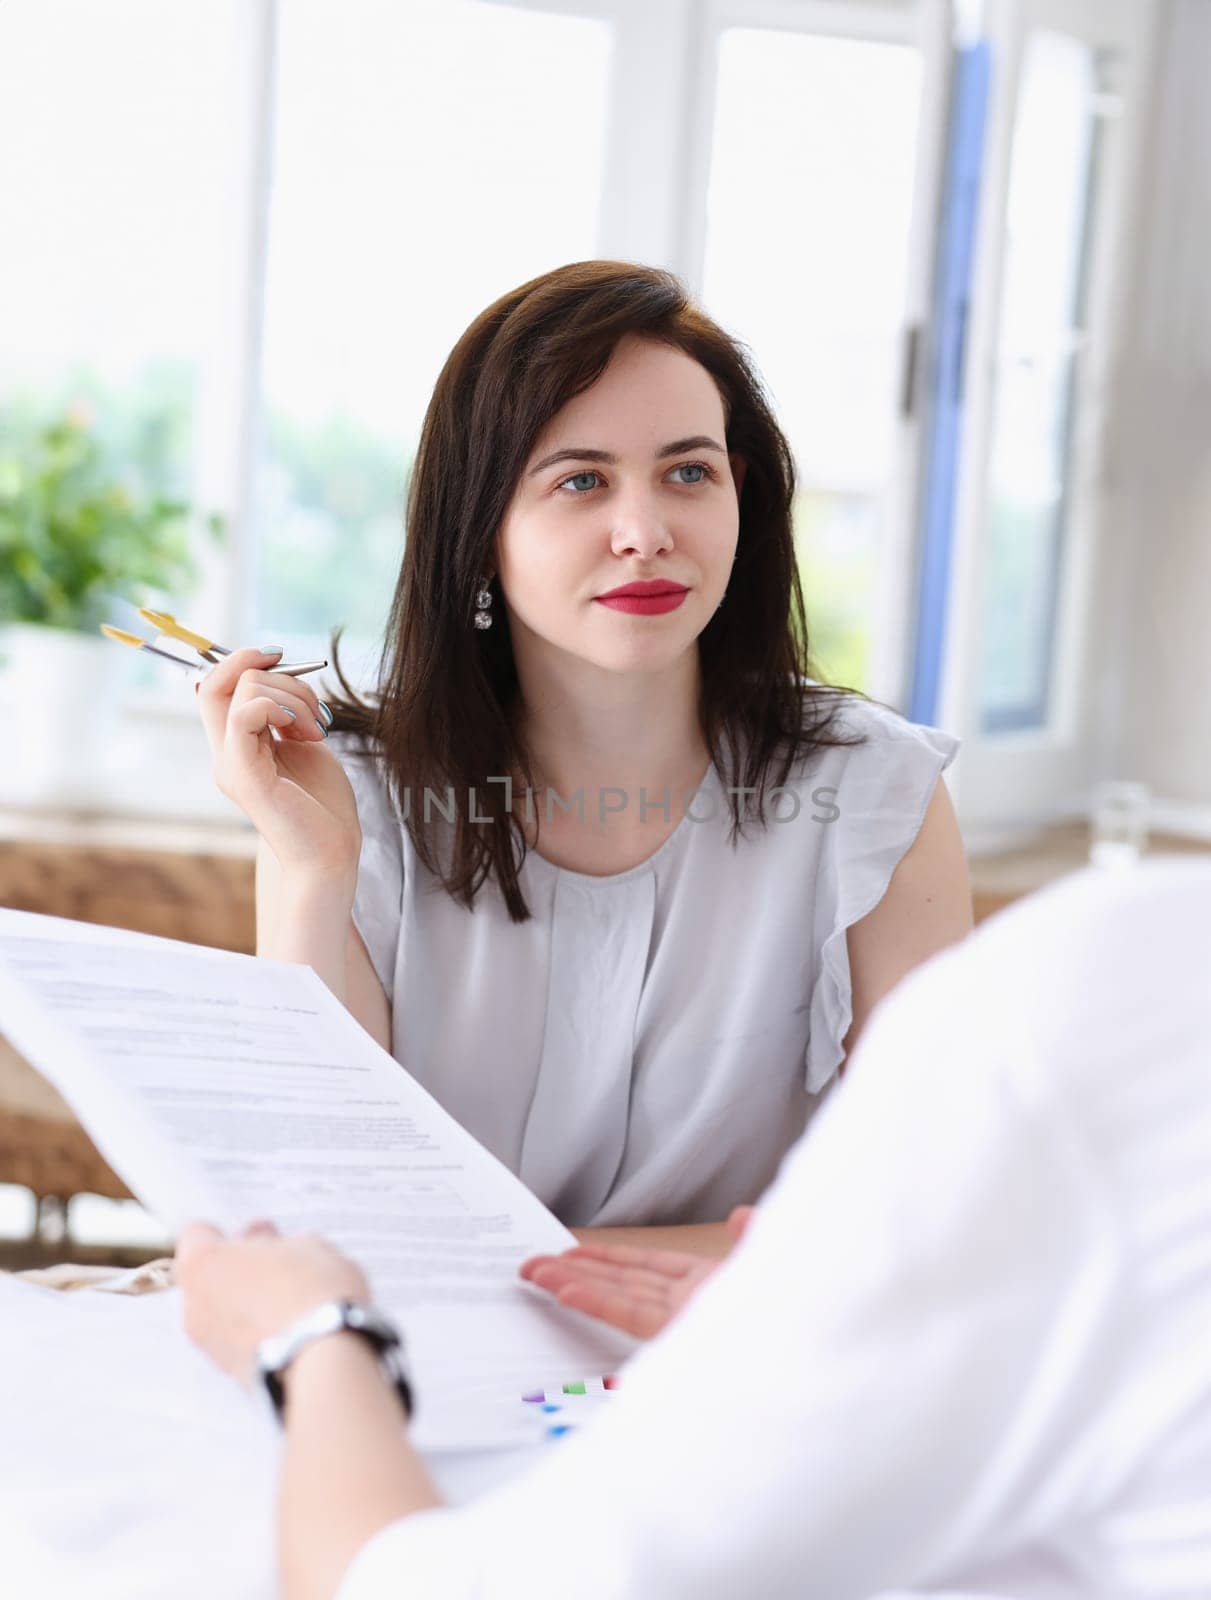 Beautiful smiling businesswoman portrait at workplace look in camera. White collar worker at workspace exchange market job offer irs certified public accountant internal revenue officer concept